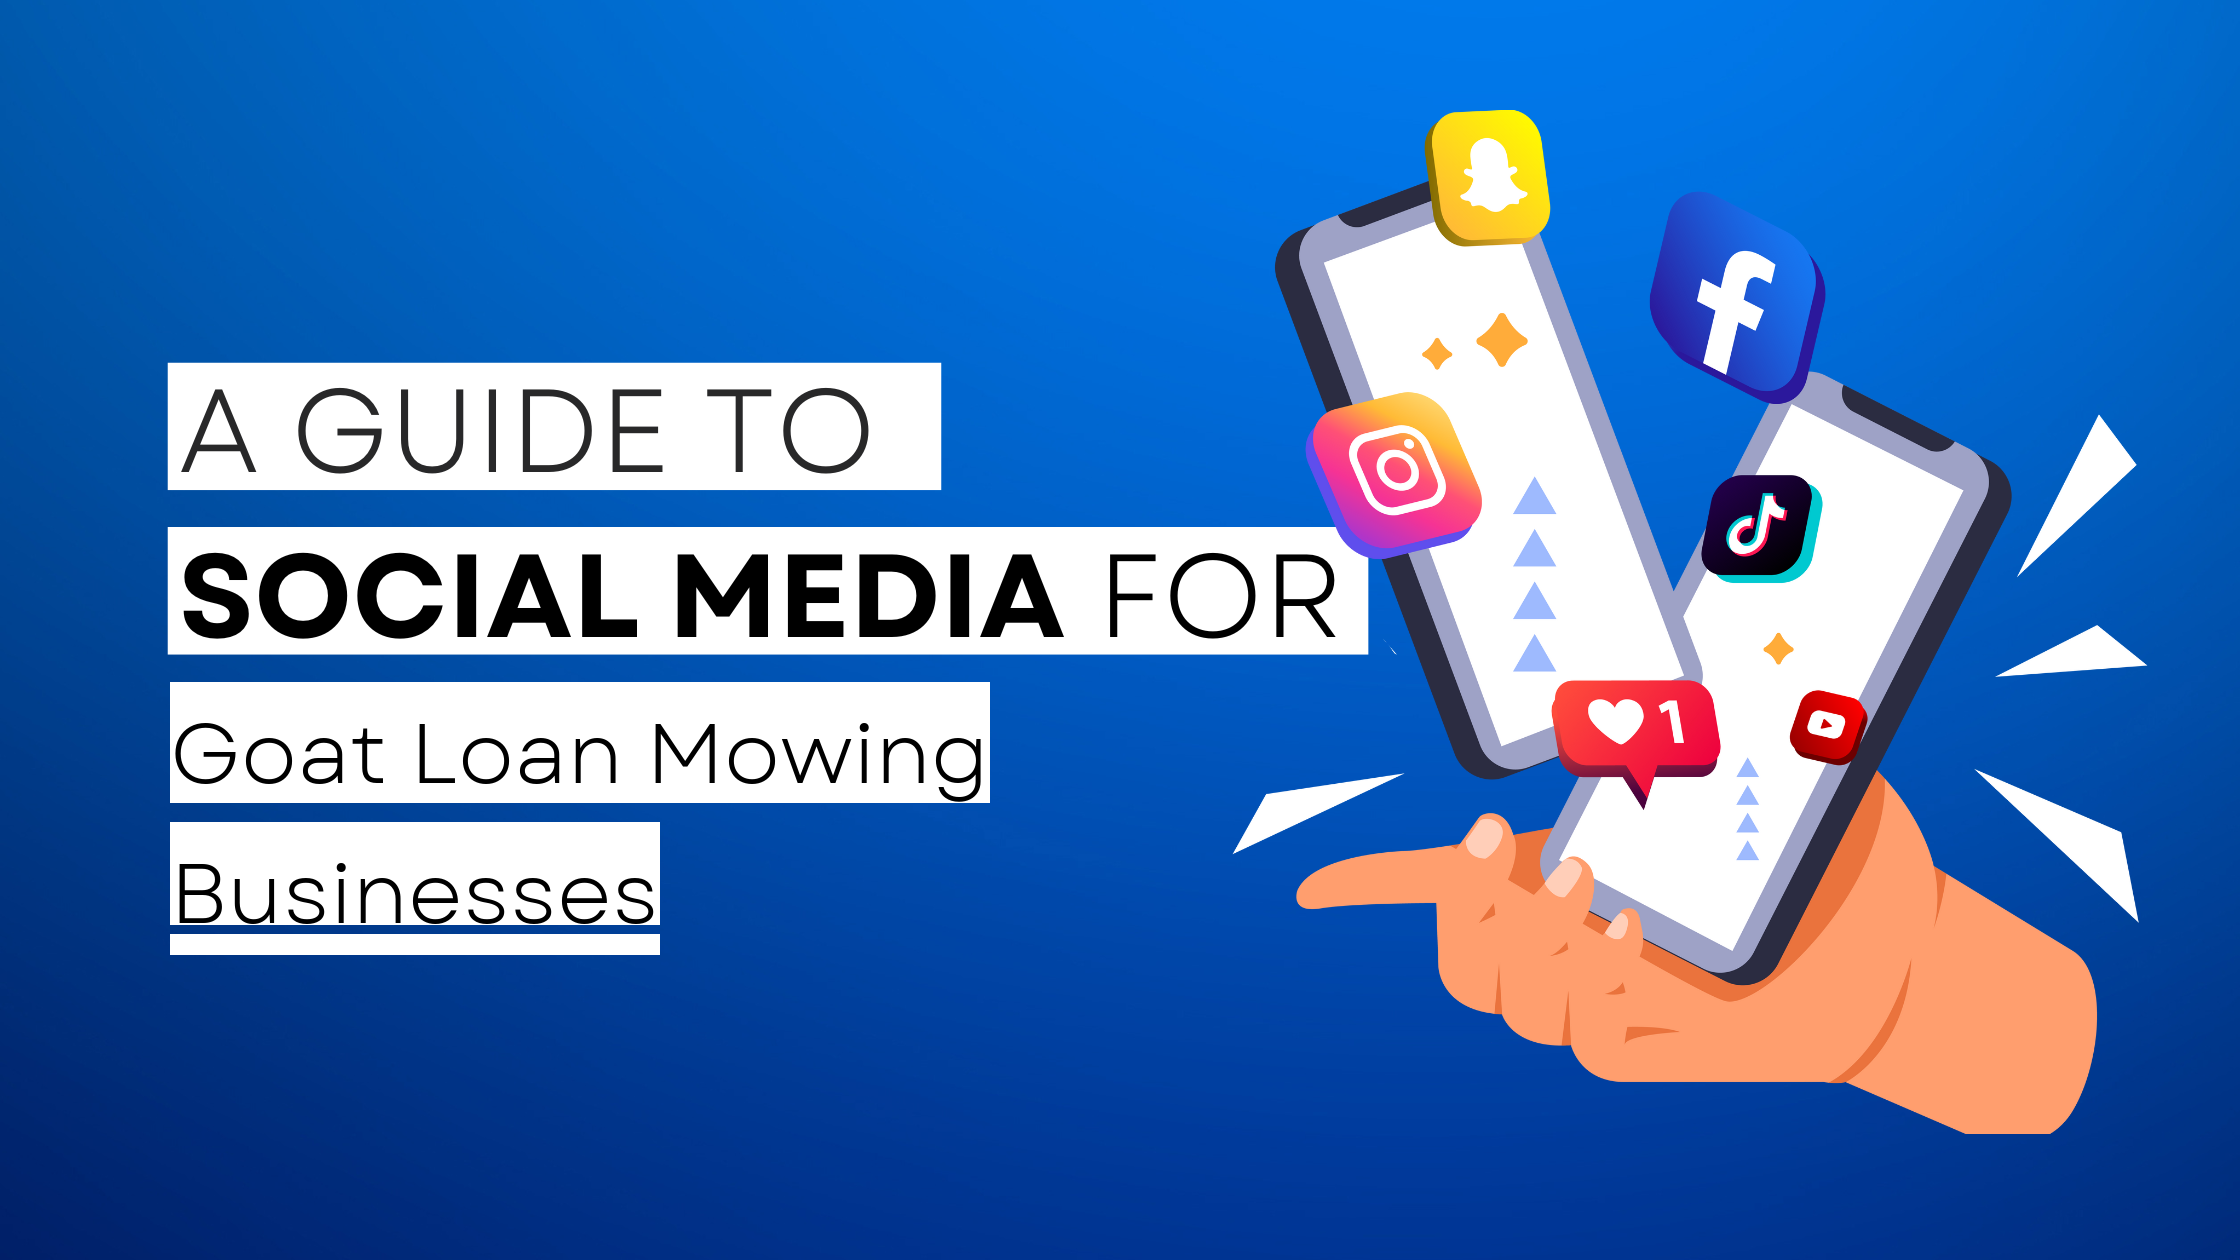 How to start Goat Loan Mowing  on social media